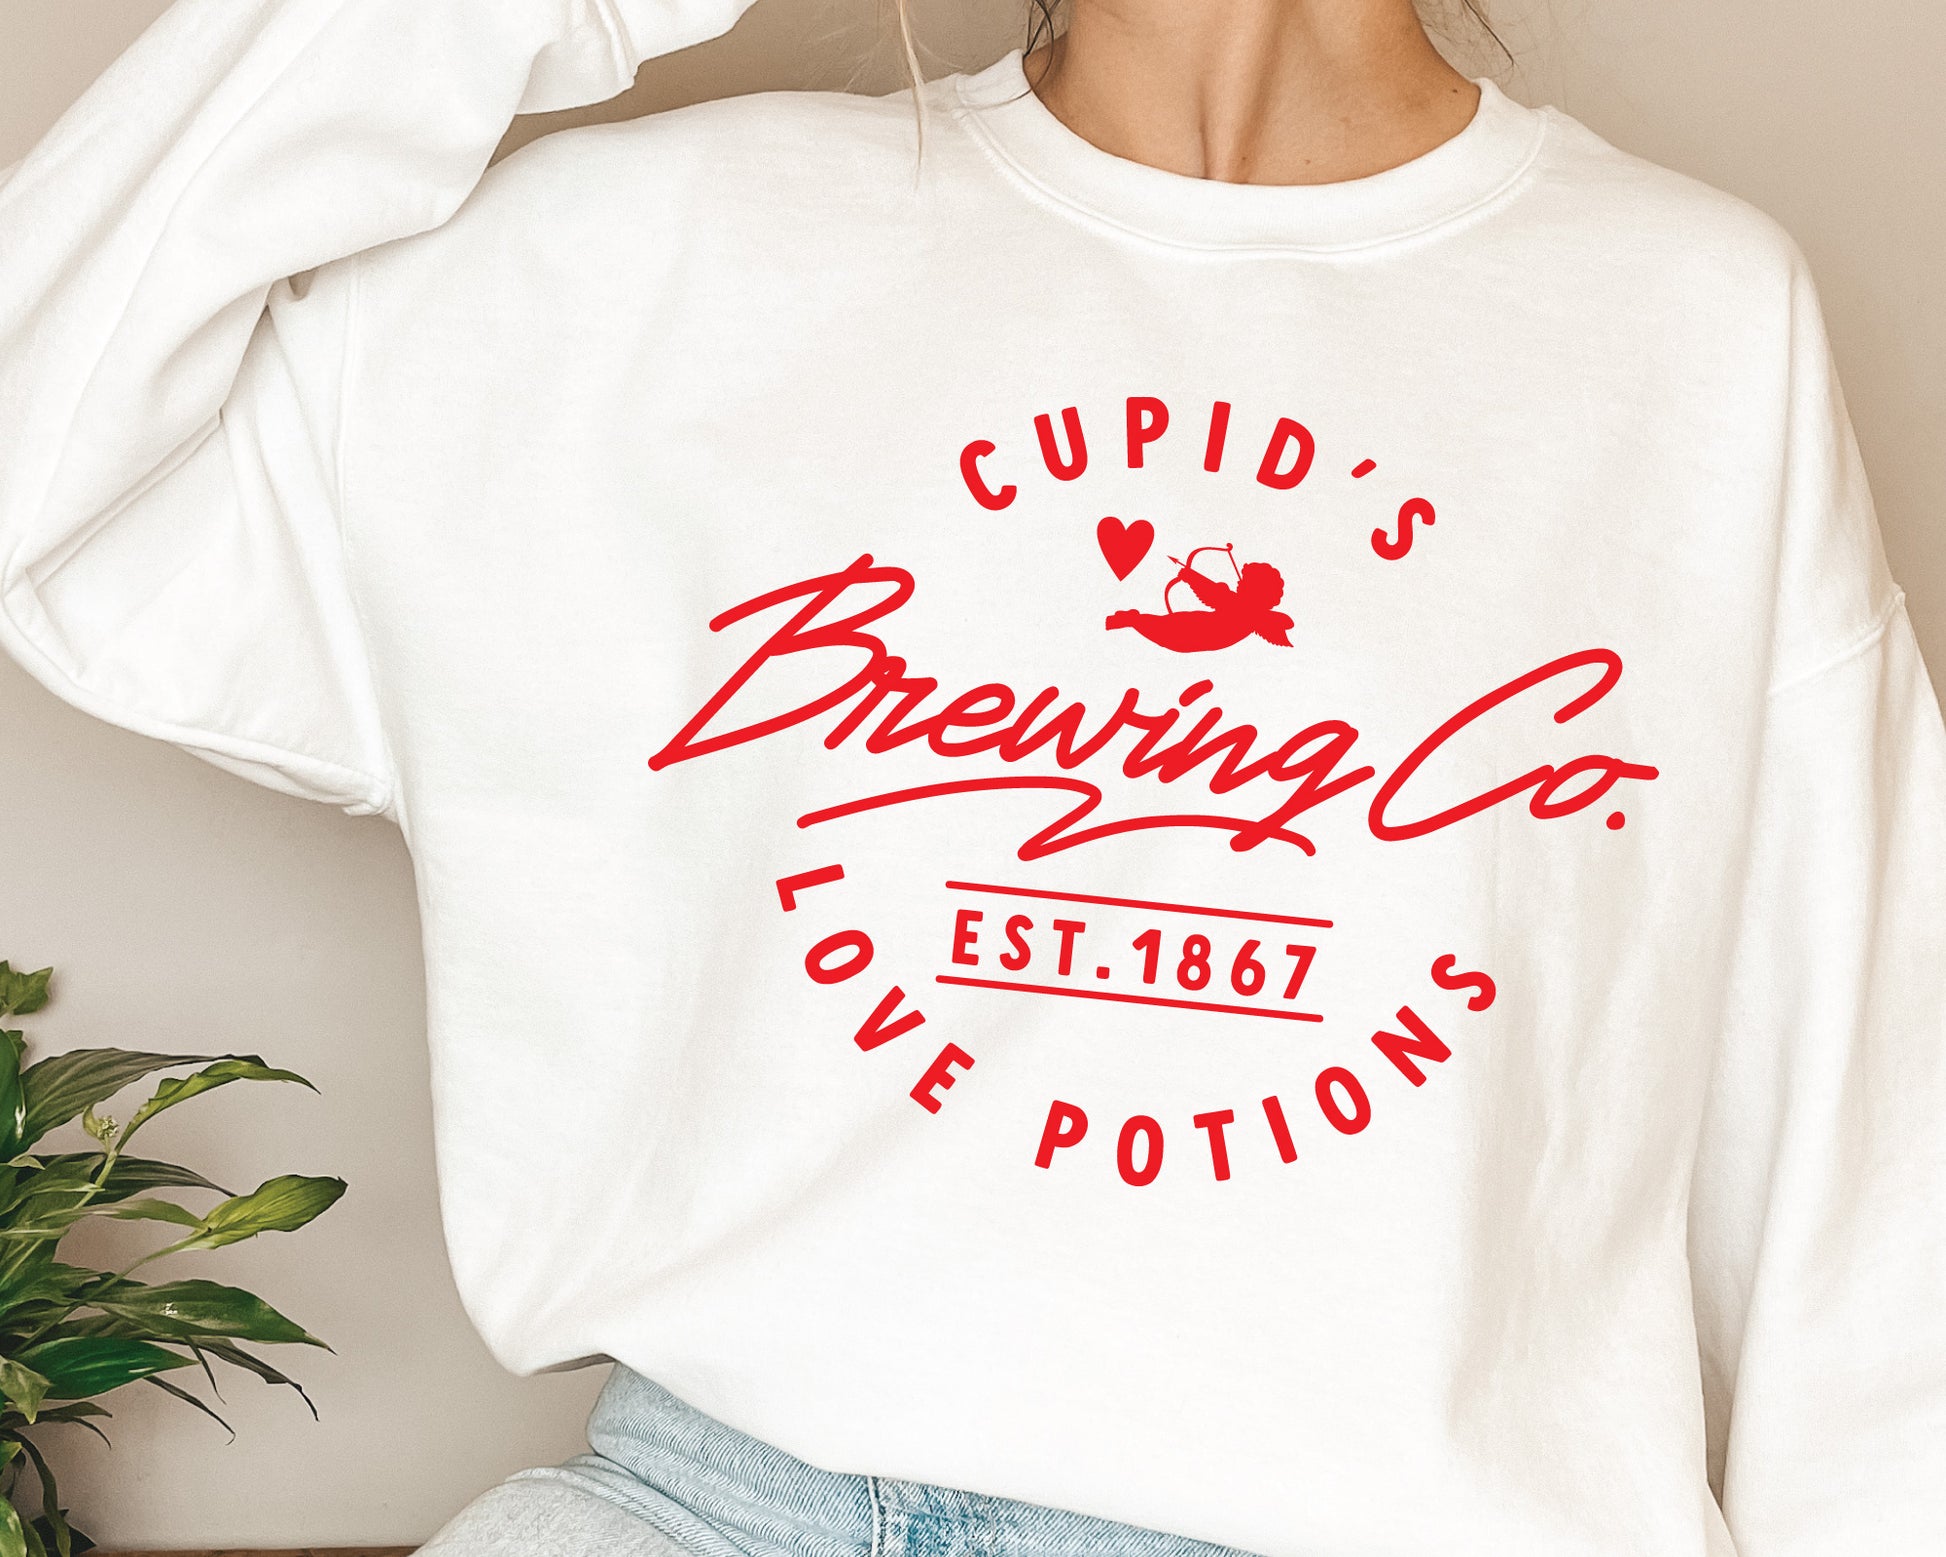 Cupid Brewing Co SVG Cut File for Cricut, Cameo Silhouette